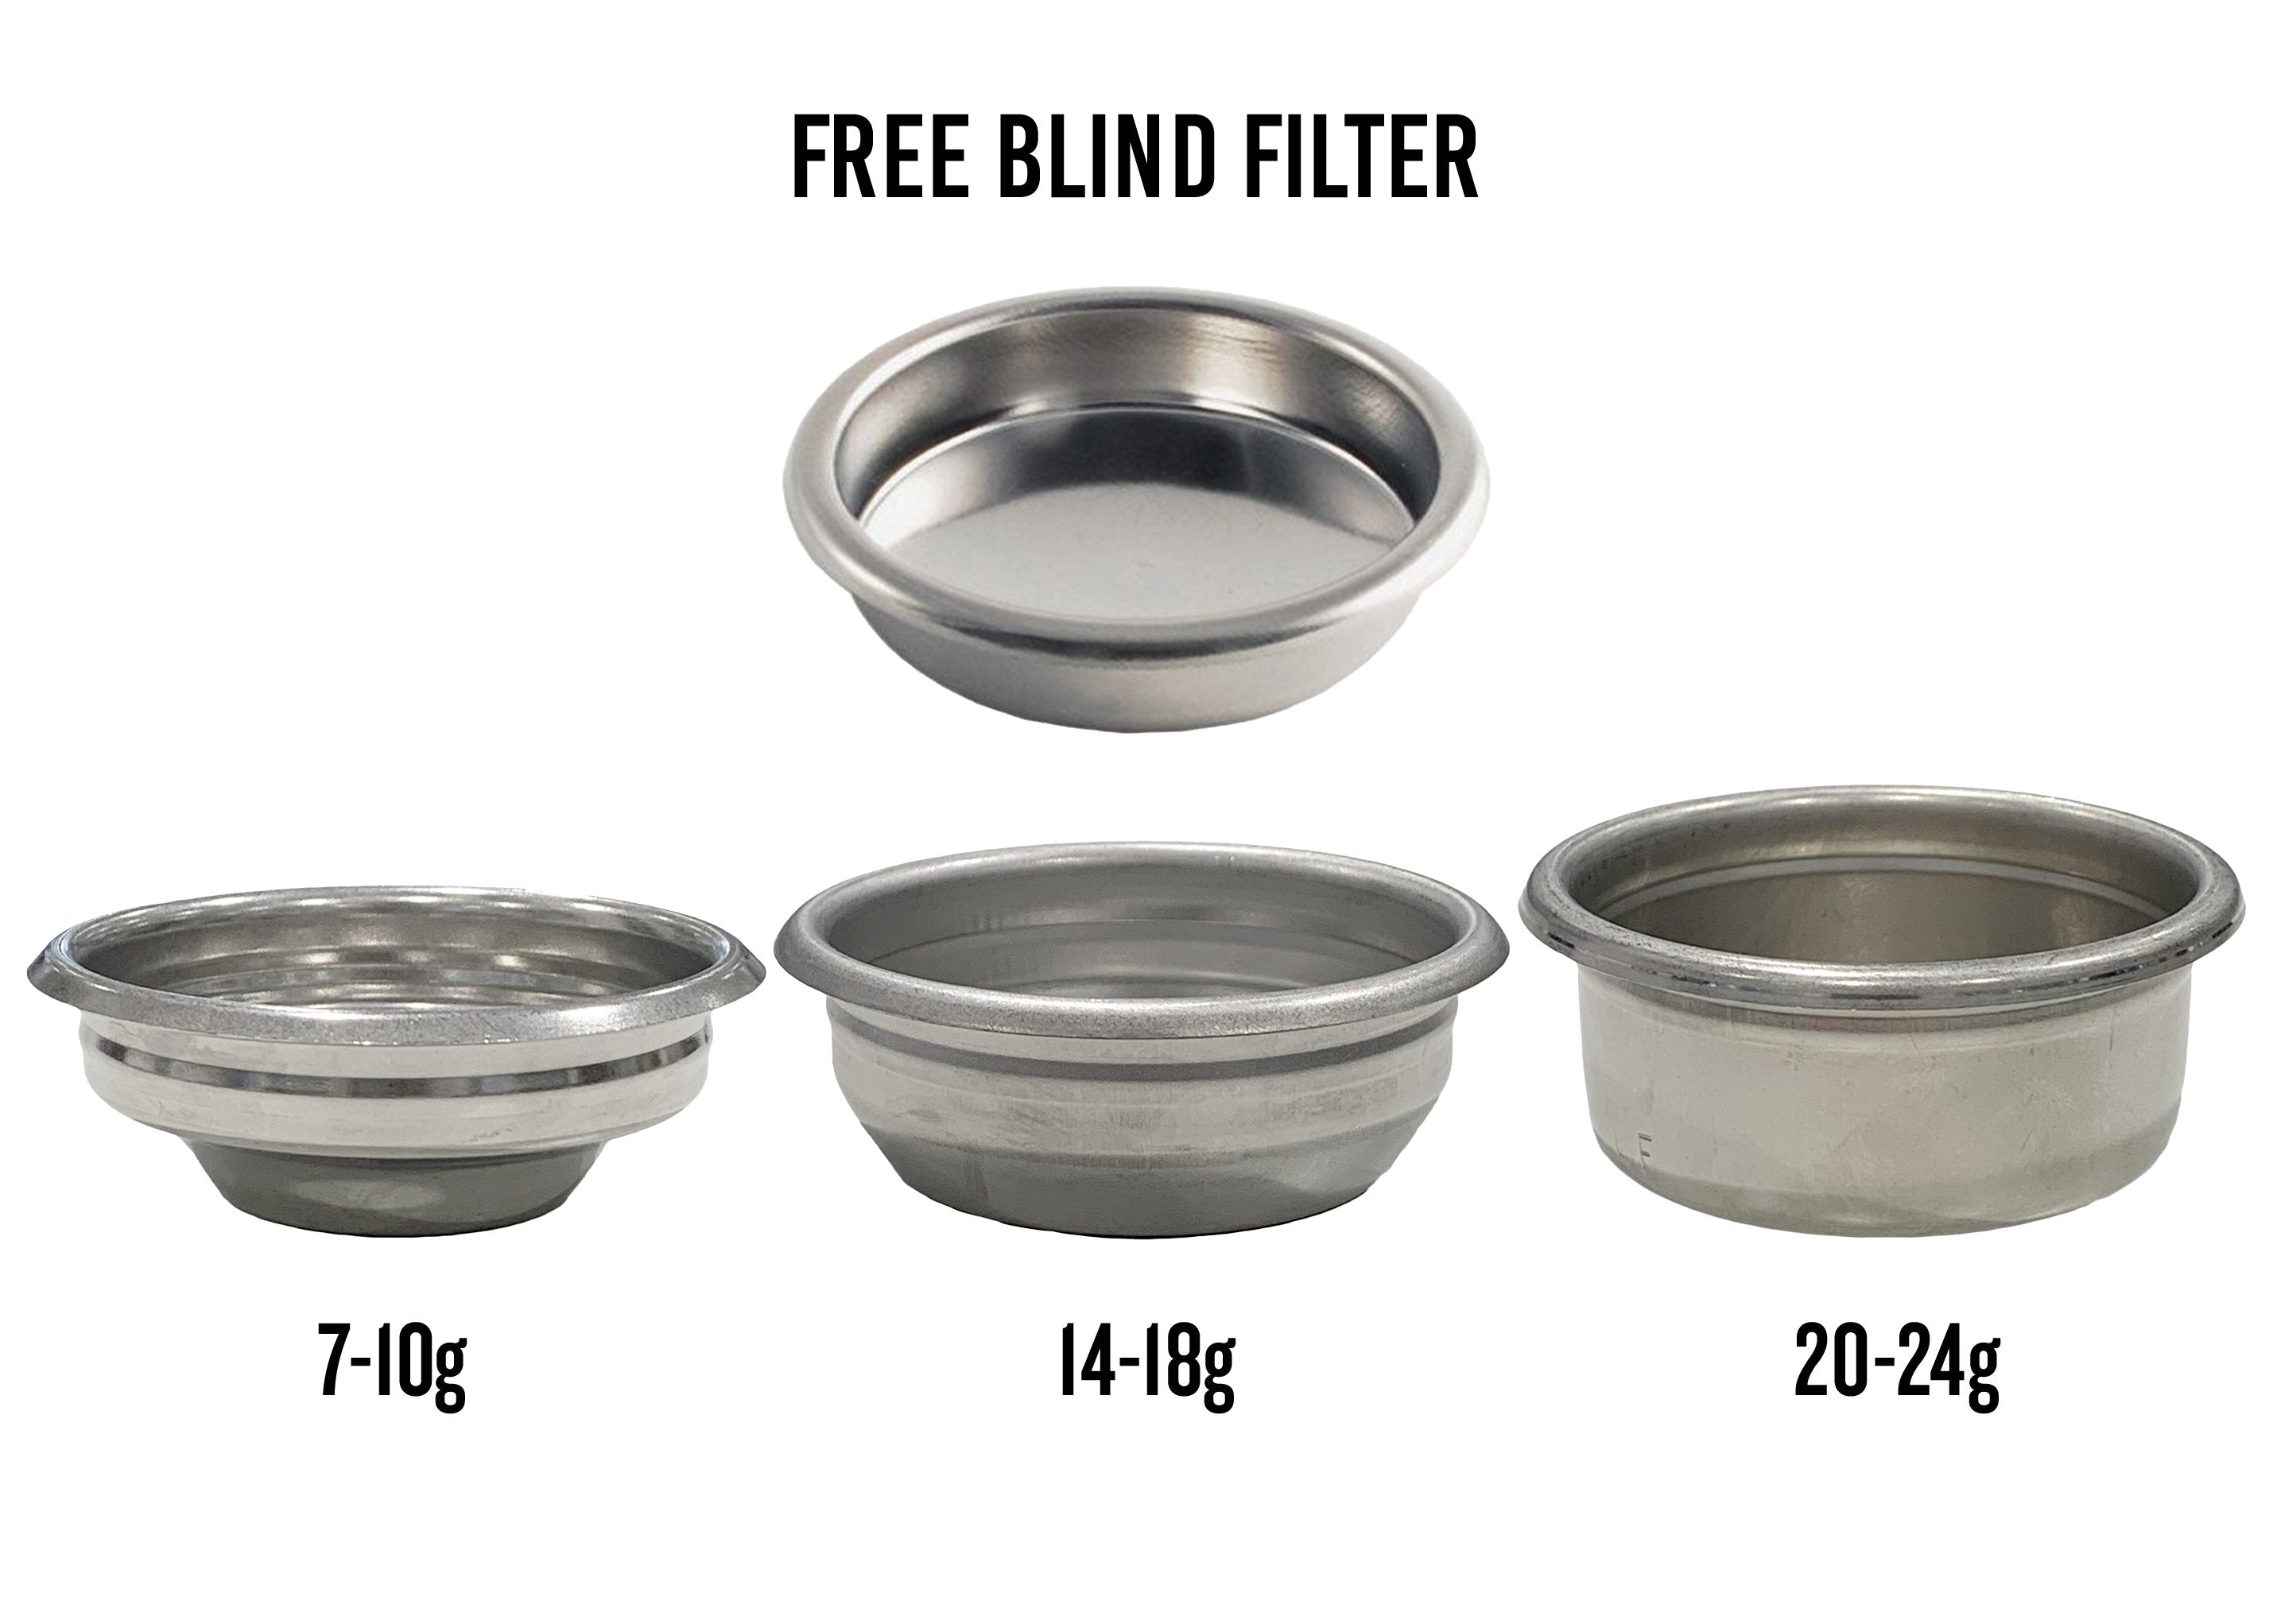 3 Pack Filter Baskets w/ Free Blind Filter - Select Sizes